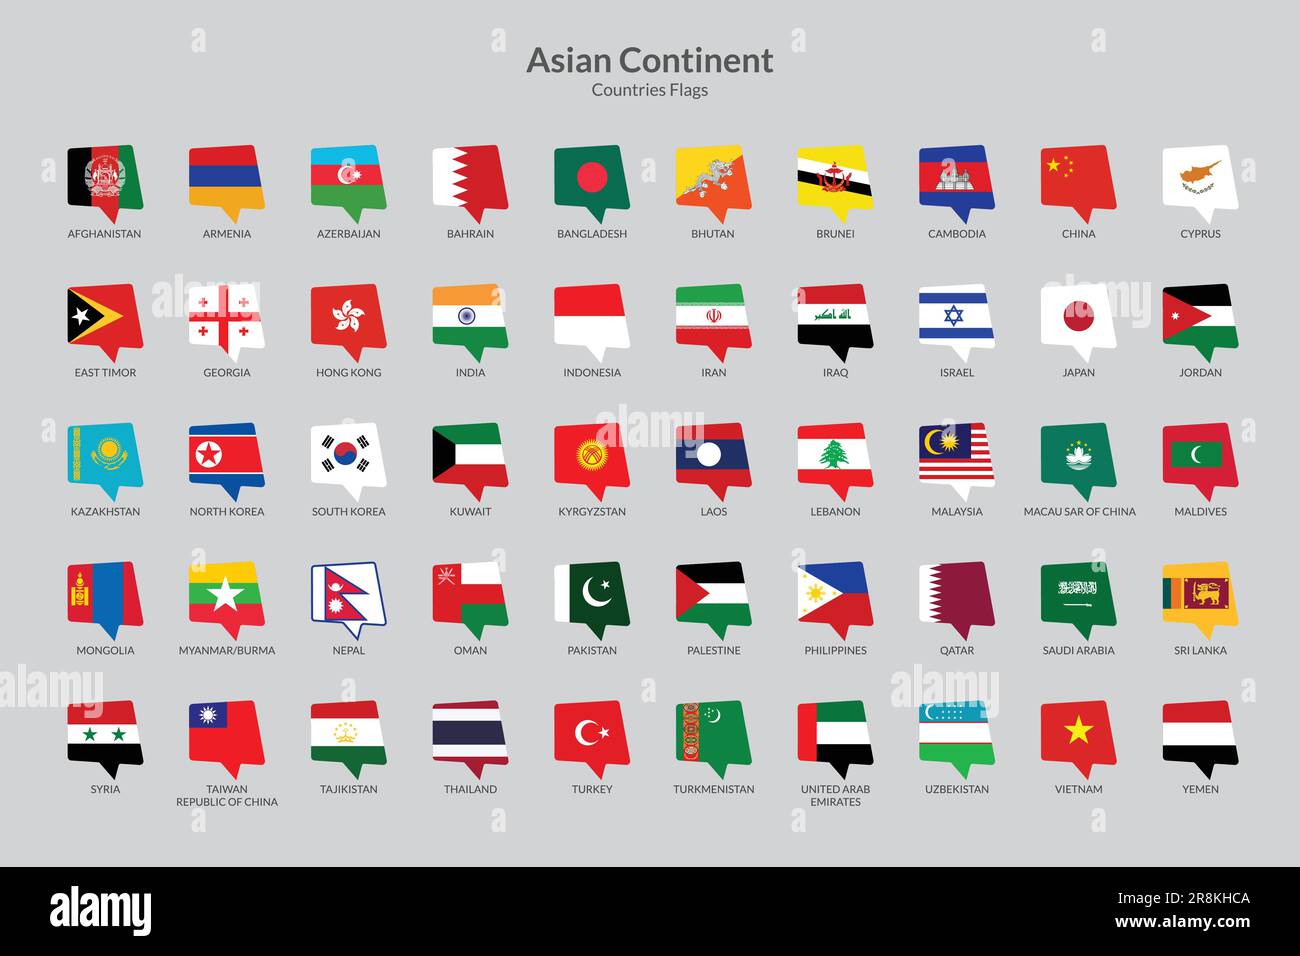 Asian Continent countries flag icons collection, Chat flag icons Stock Vector